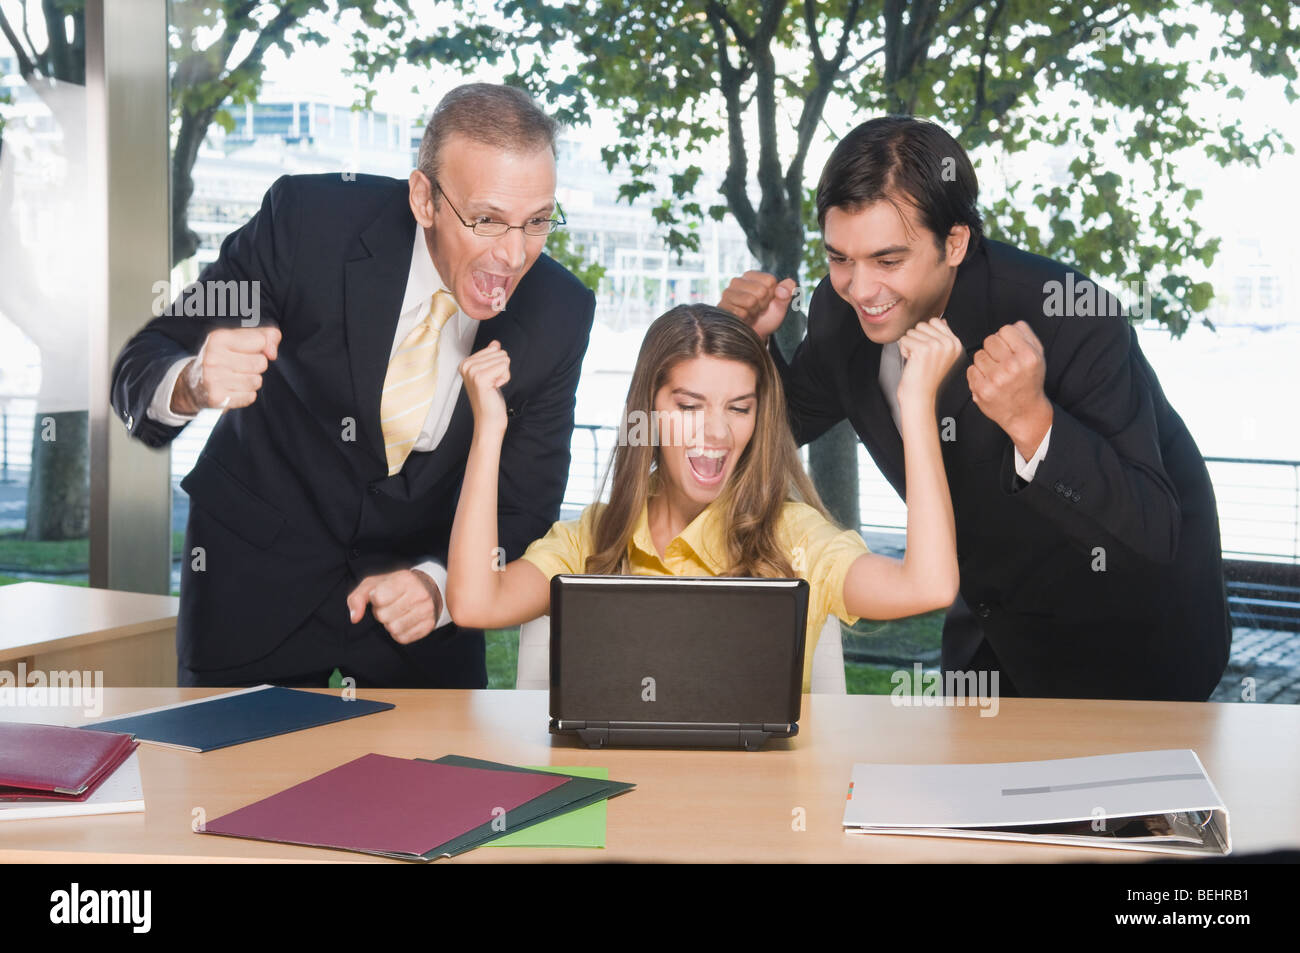 Business executives looking excited in front of a laptop Stock Photo